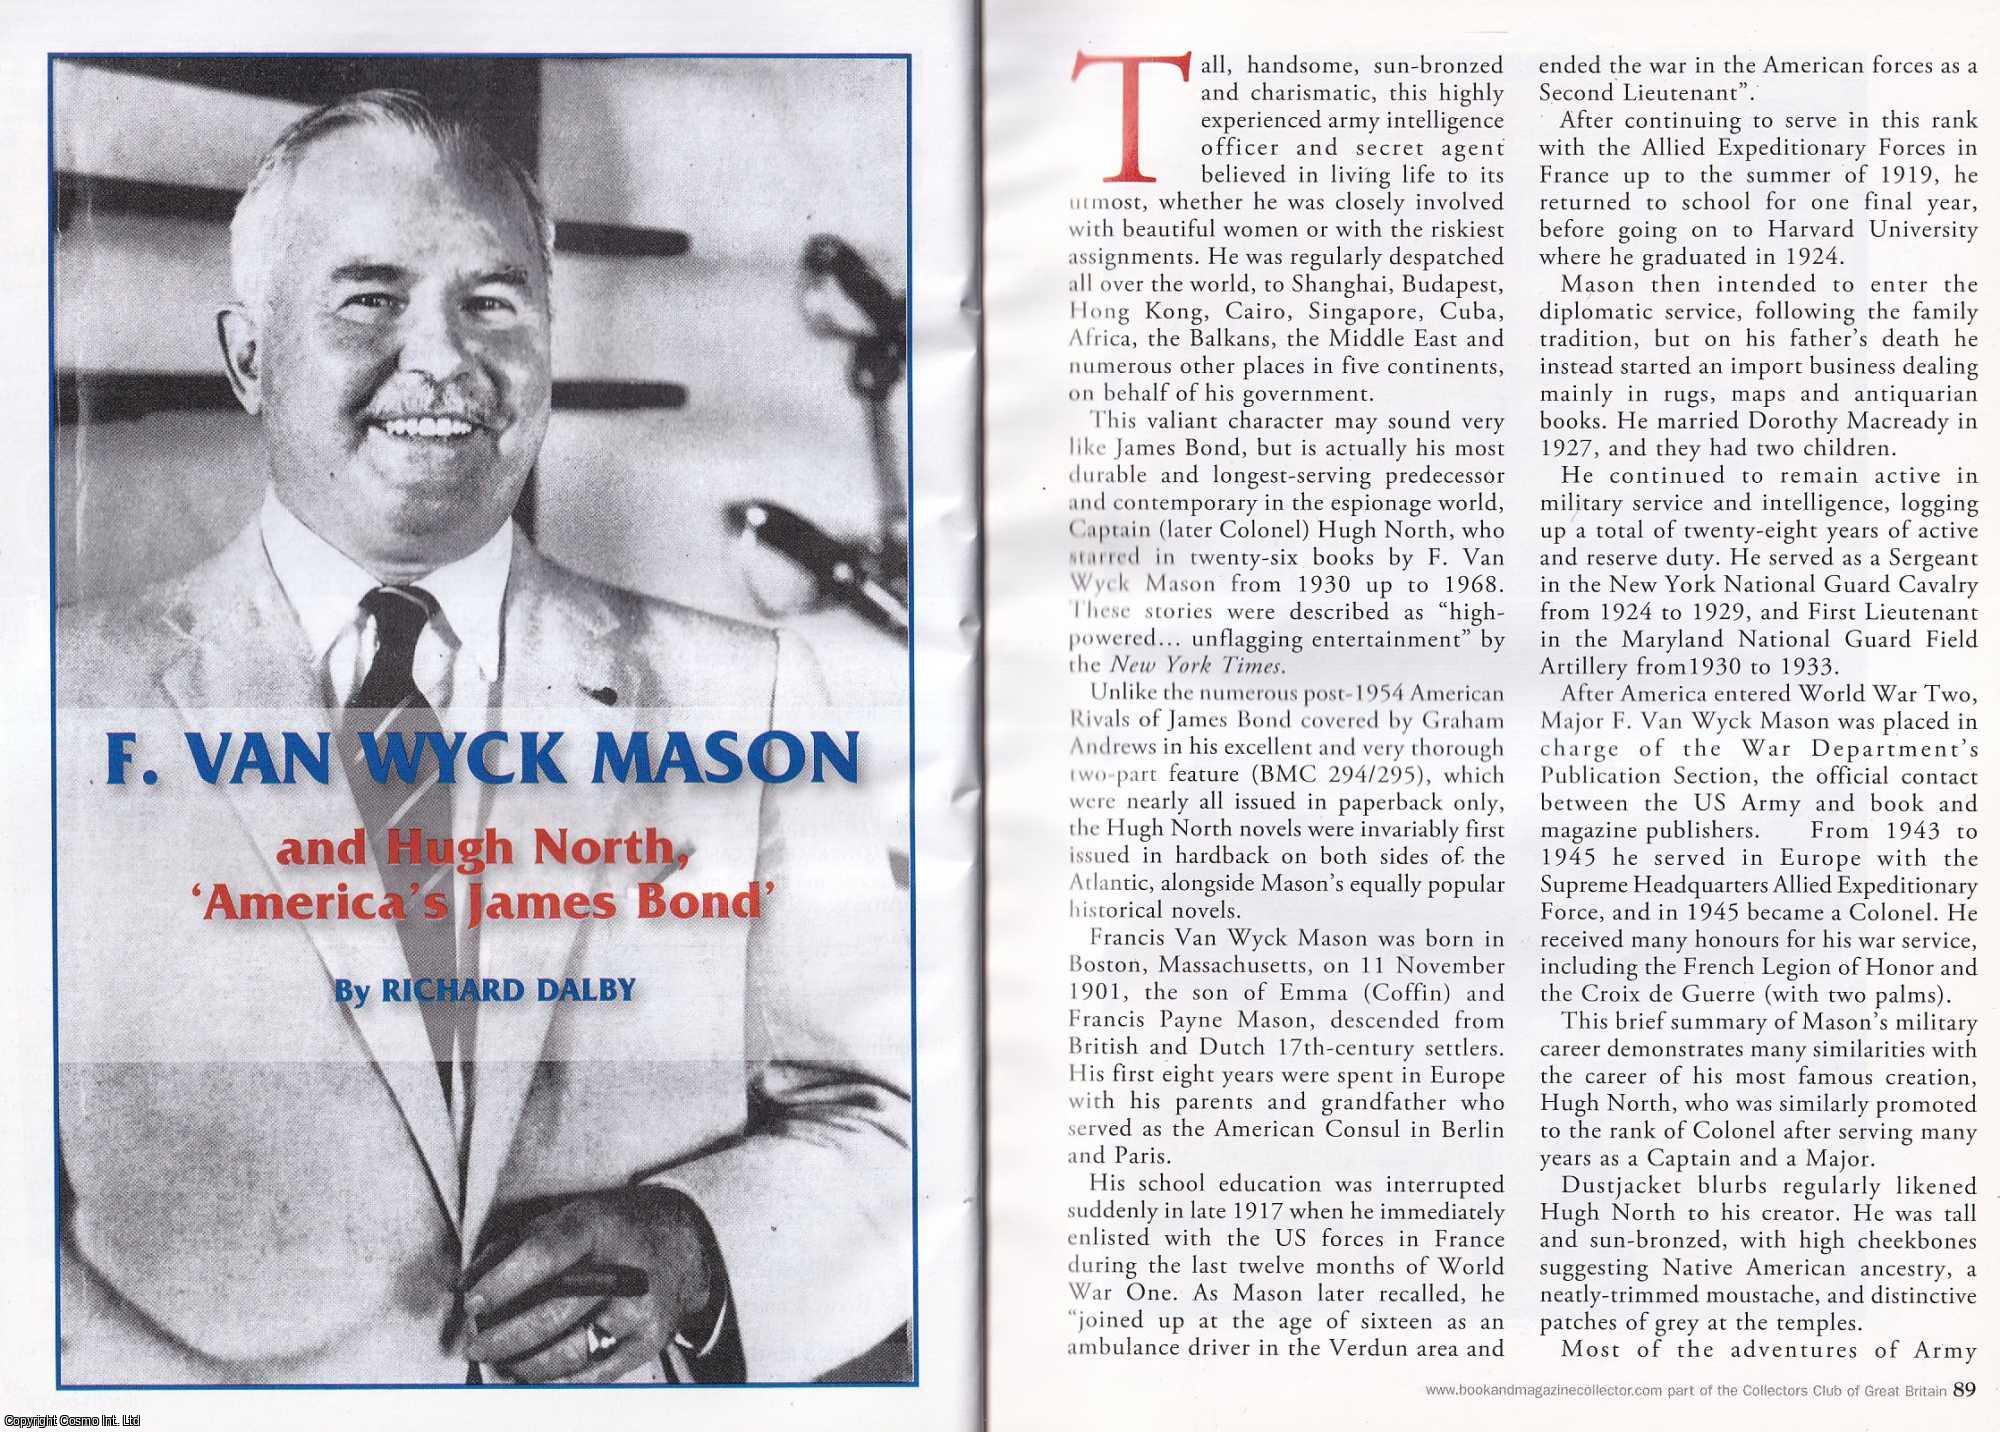 Richard Dalby - F. Van Wyck Mason and Hugh North, America's James Bond. This is an original article separated from an issue of The Book & Magazine Collector publication, 2009.